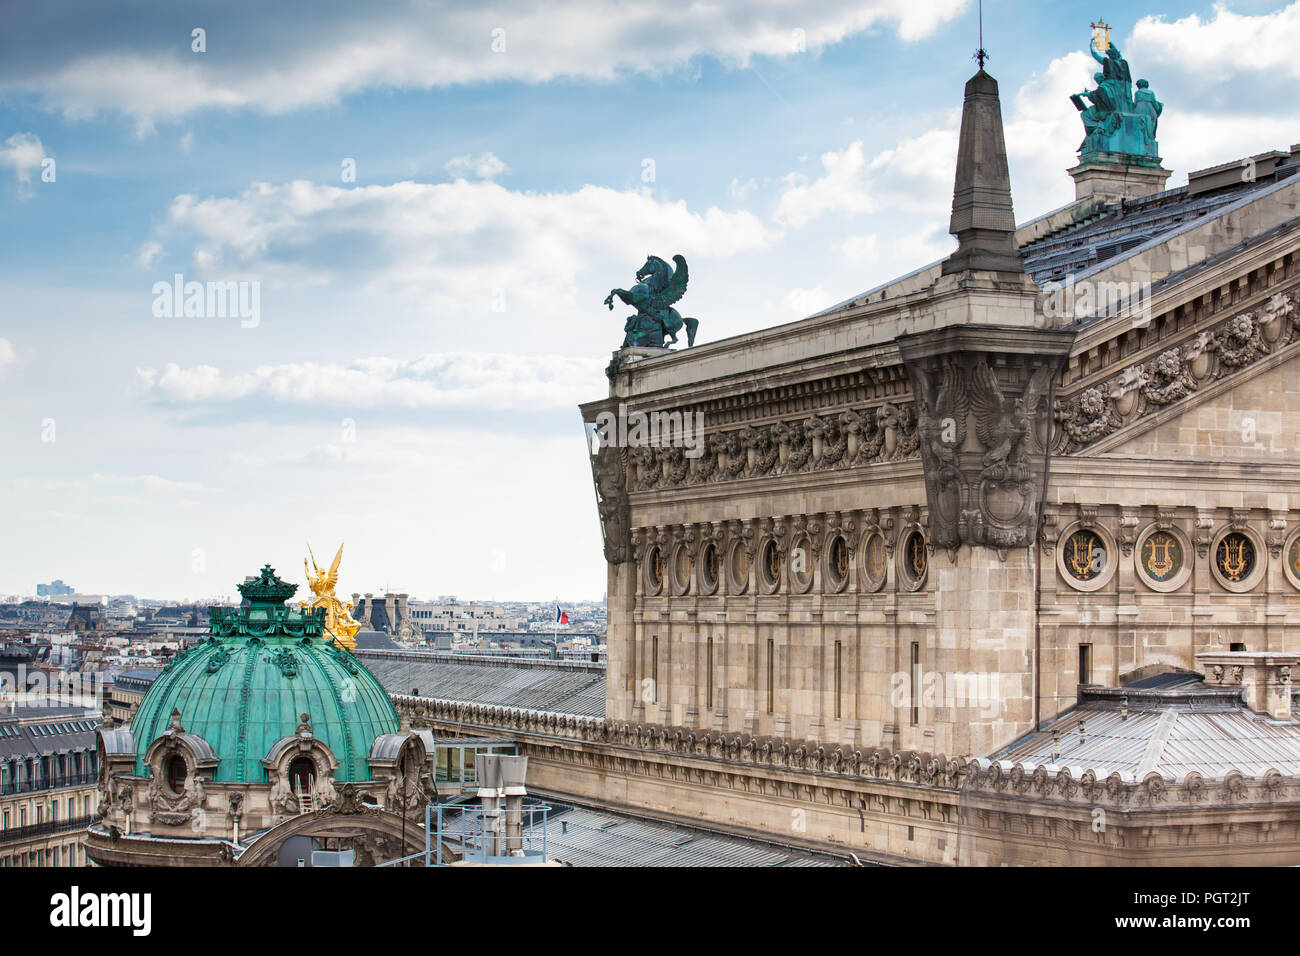 View of fancy buildings from La Samaritaine rooftop, Paris, France Stock  Photo - Alamy